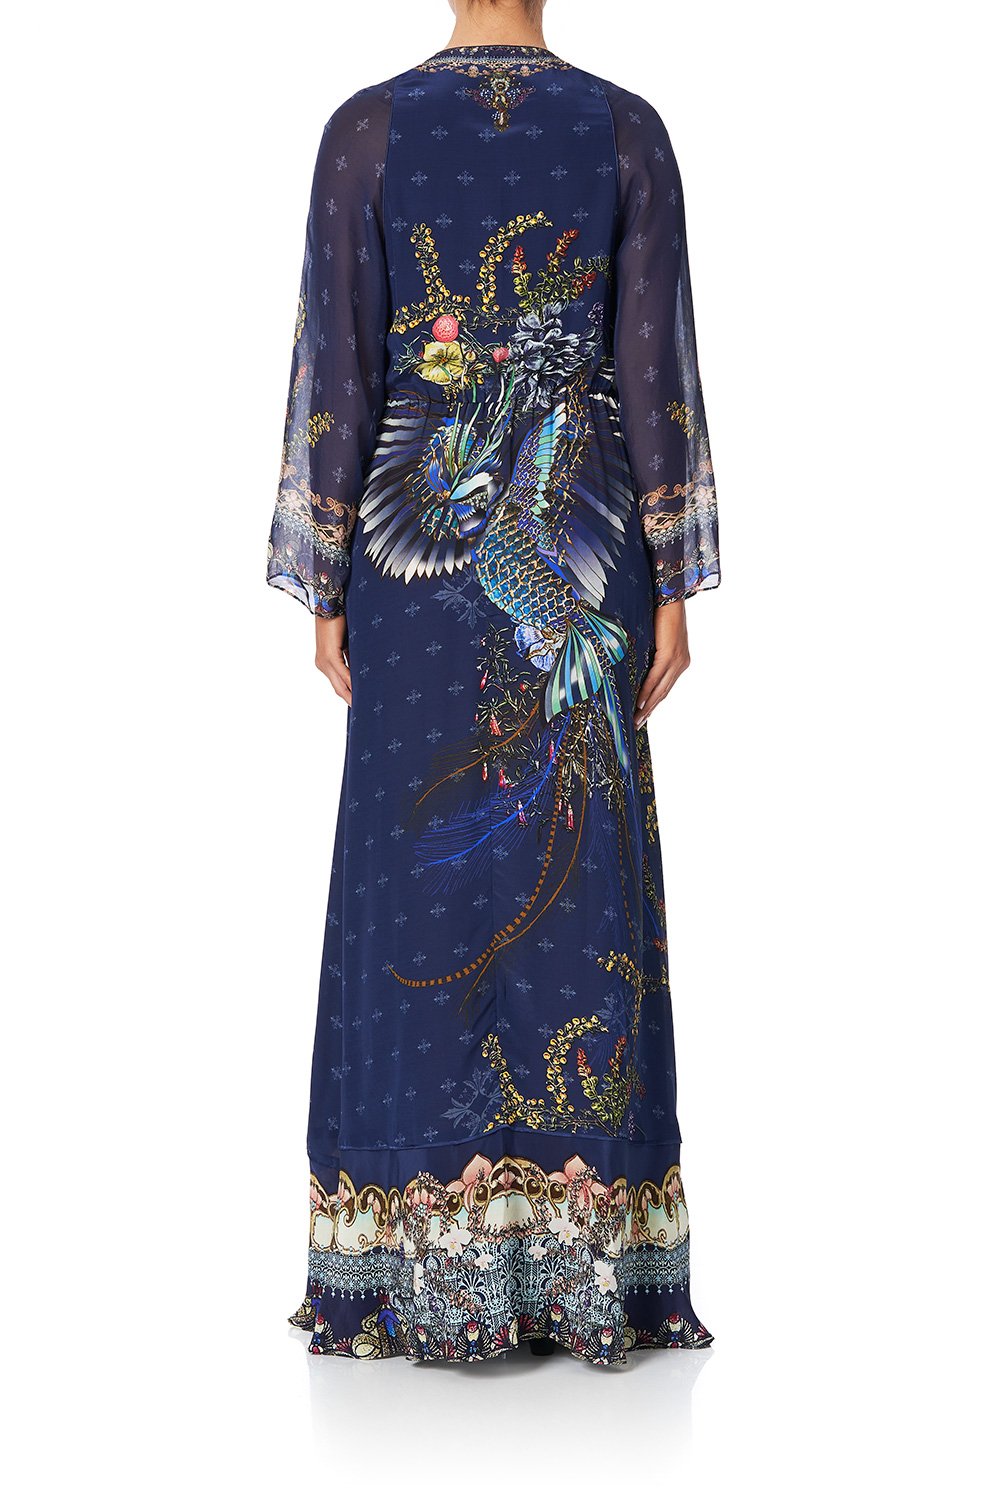 WRAP DRESS WITH PIPING DETAIL SOUTHERN TWILIGHT